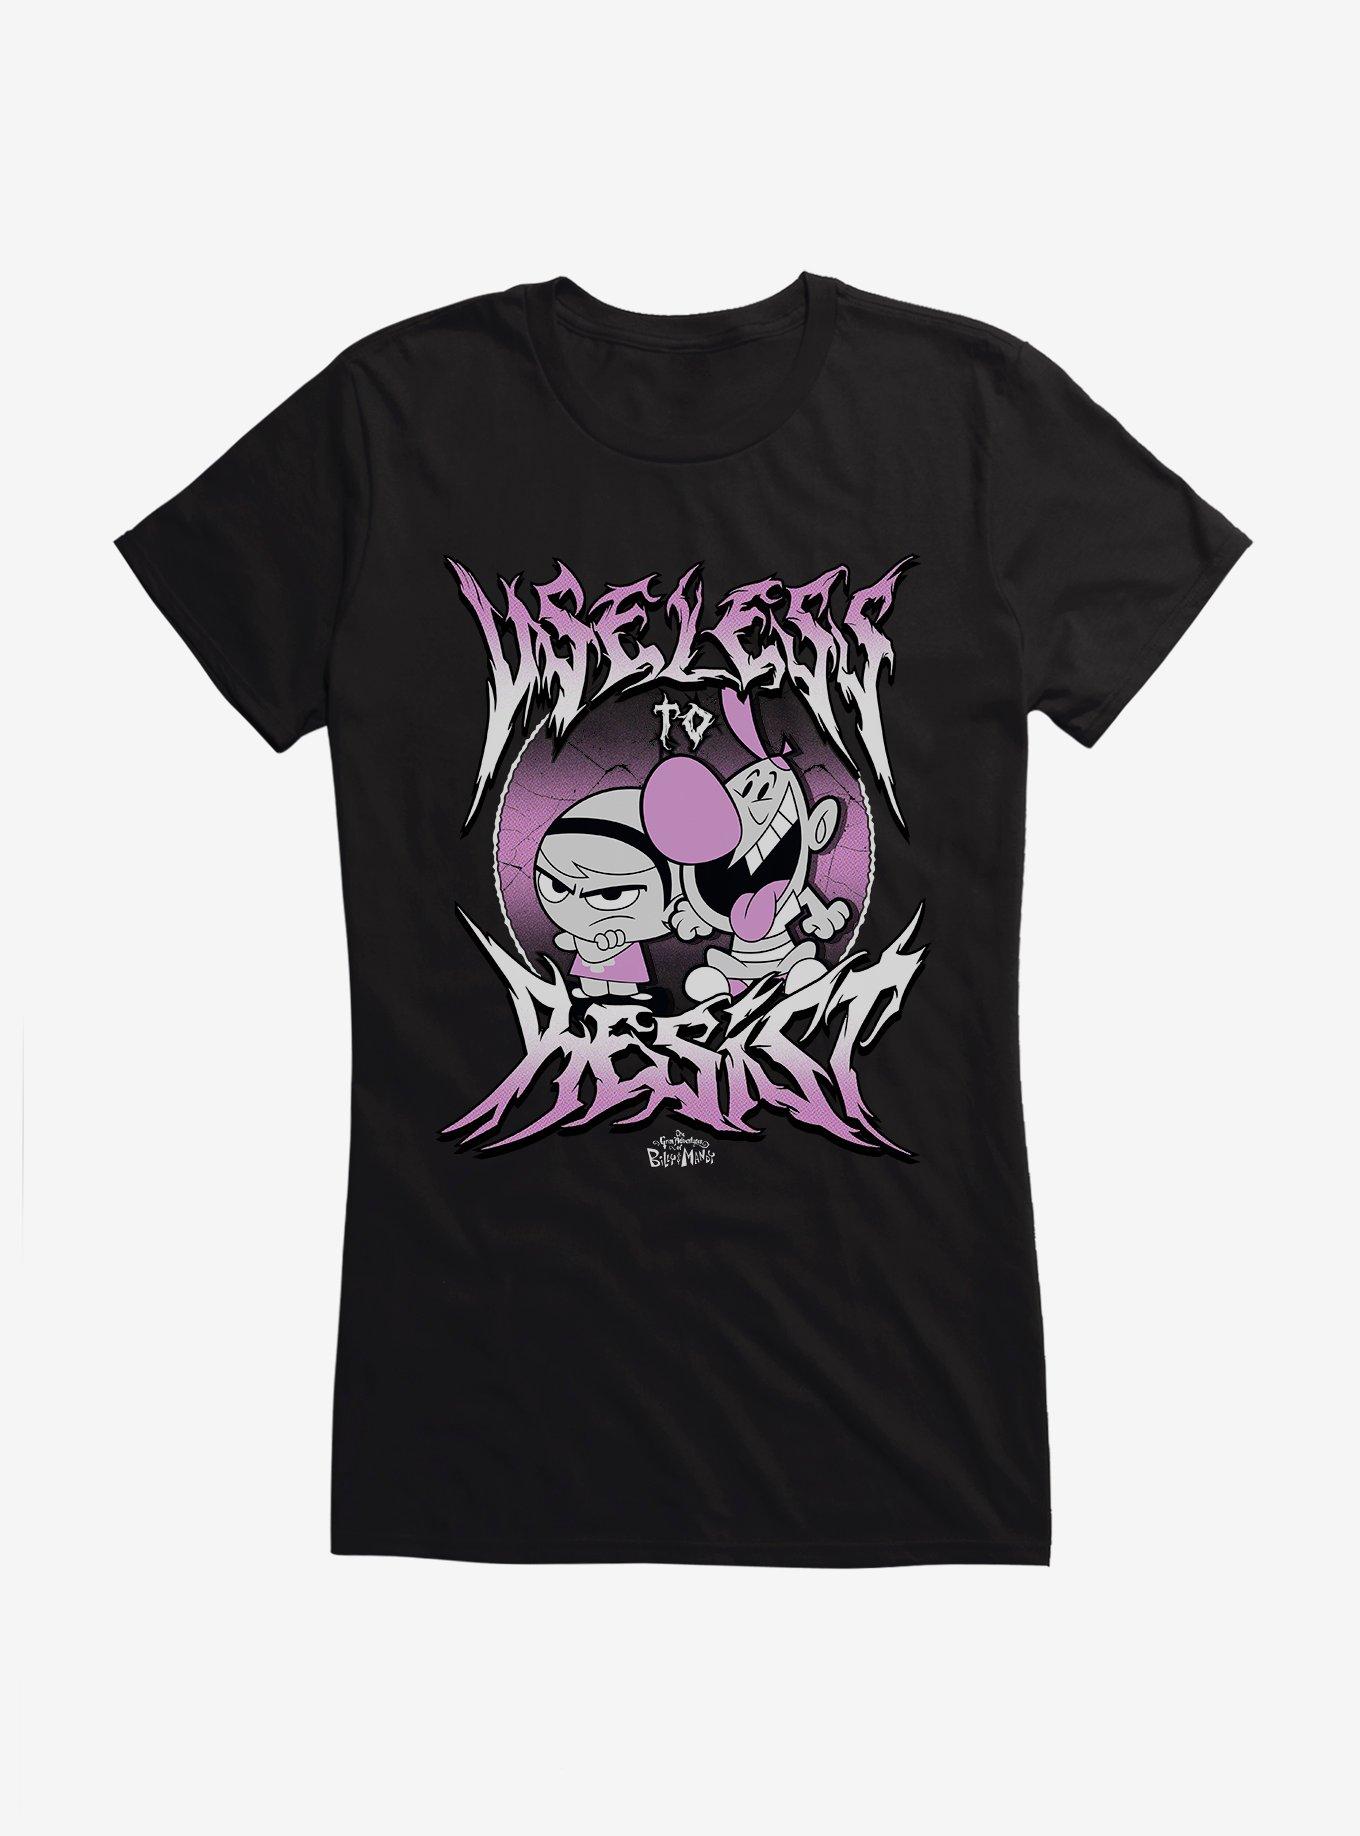 Grim Adventures Of Billy And Mandy Useless To Resist Girls T-Shirt, , hi-res